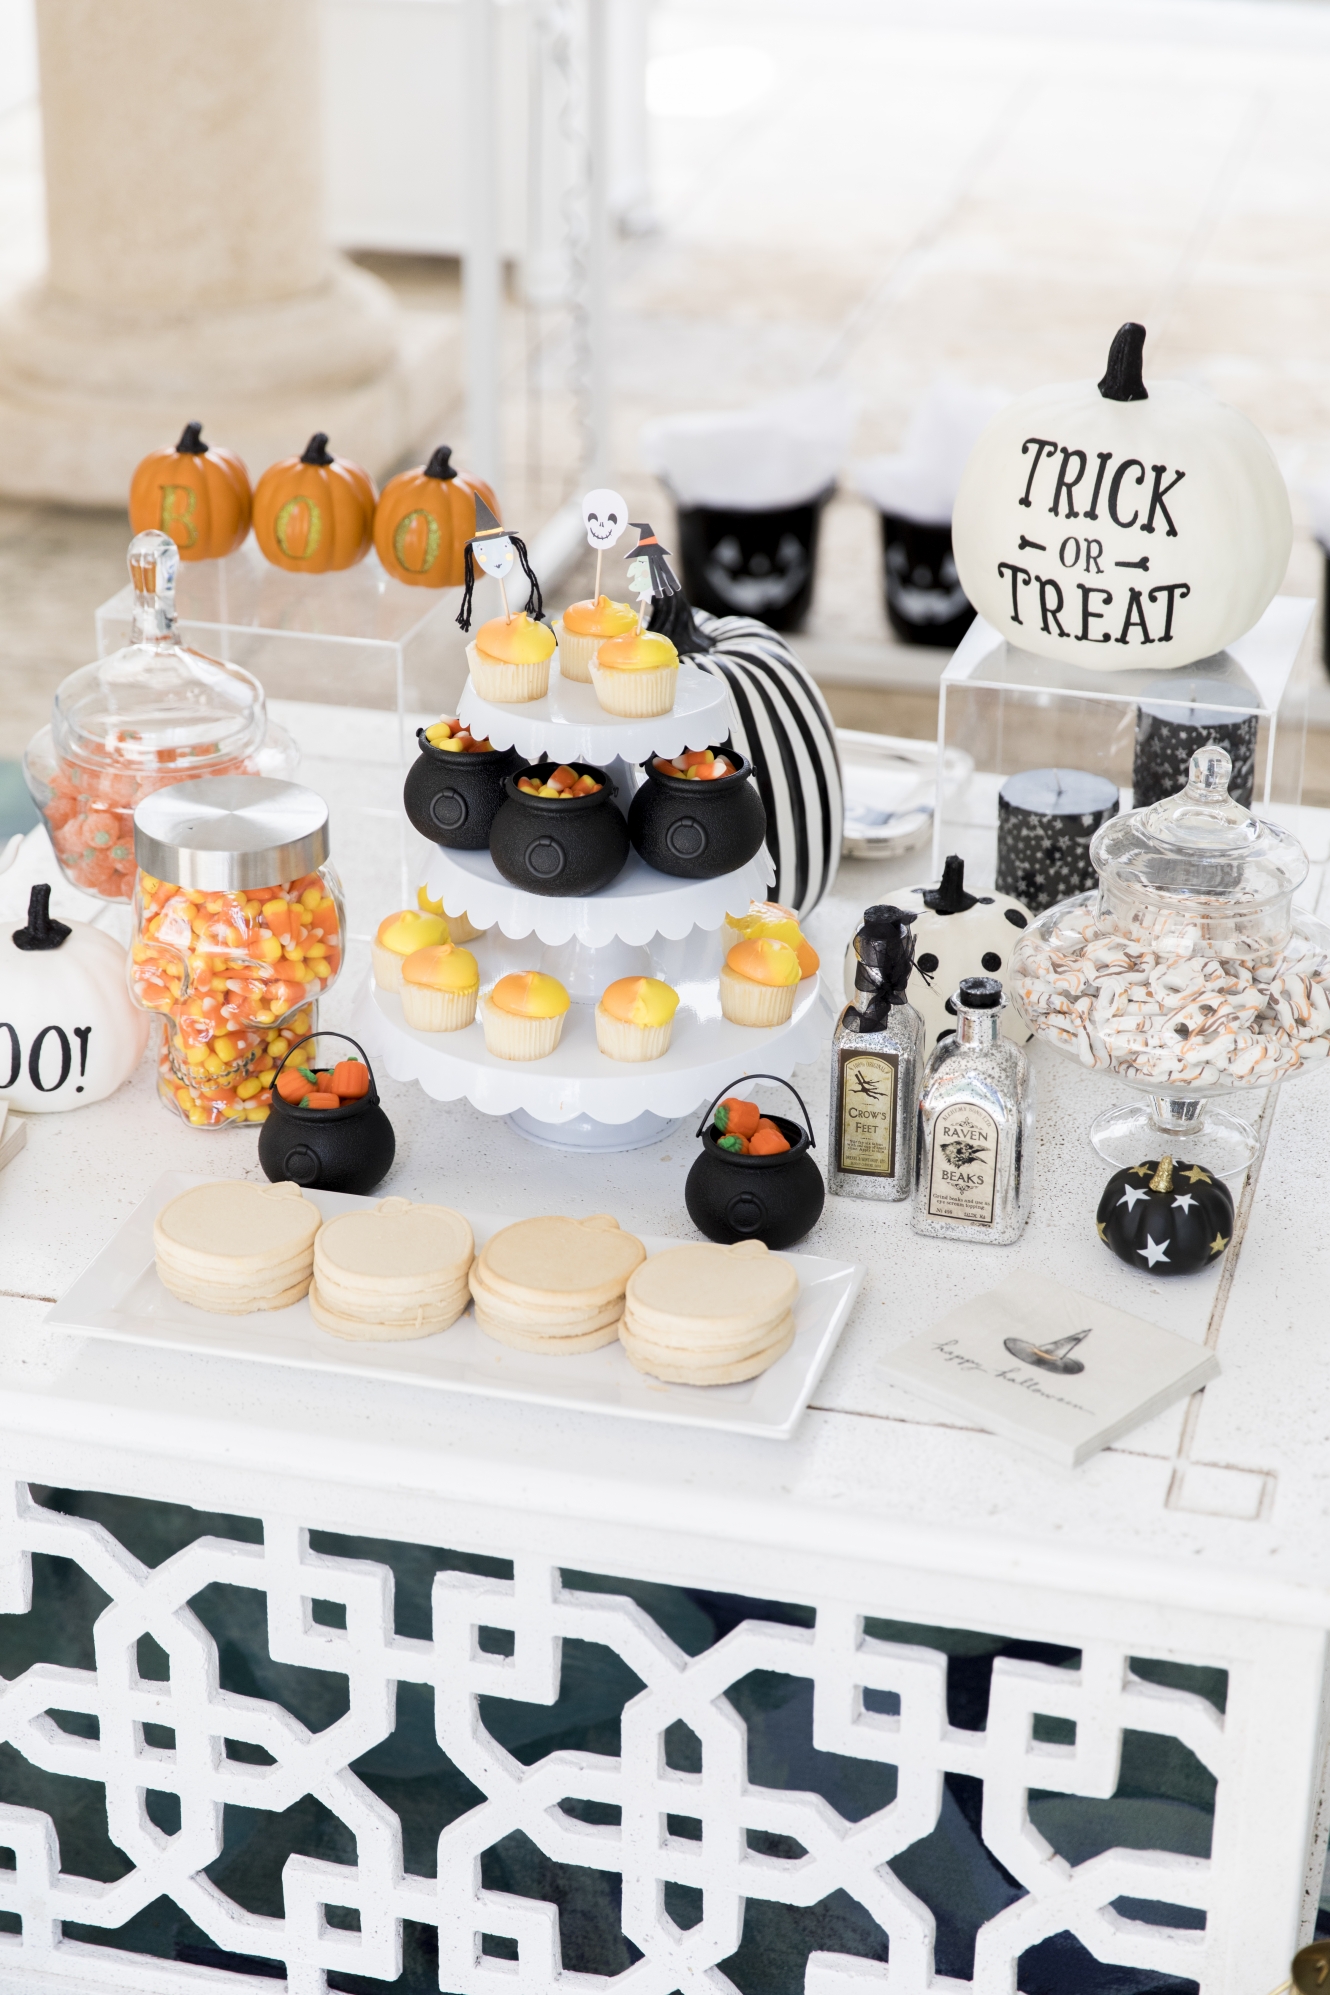 Impress Everyone with These Halloween Office Desserts